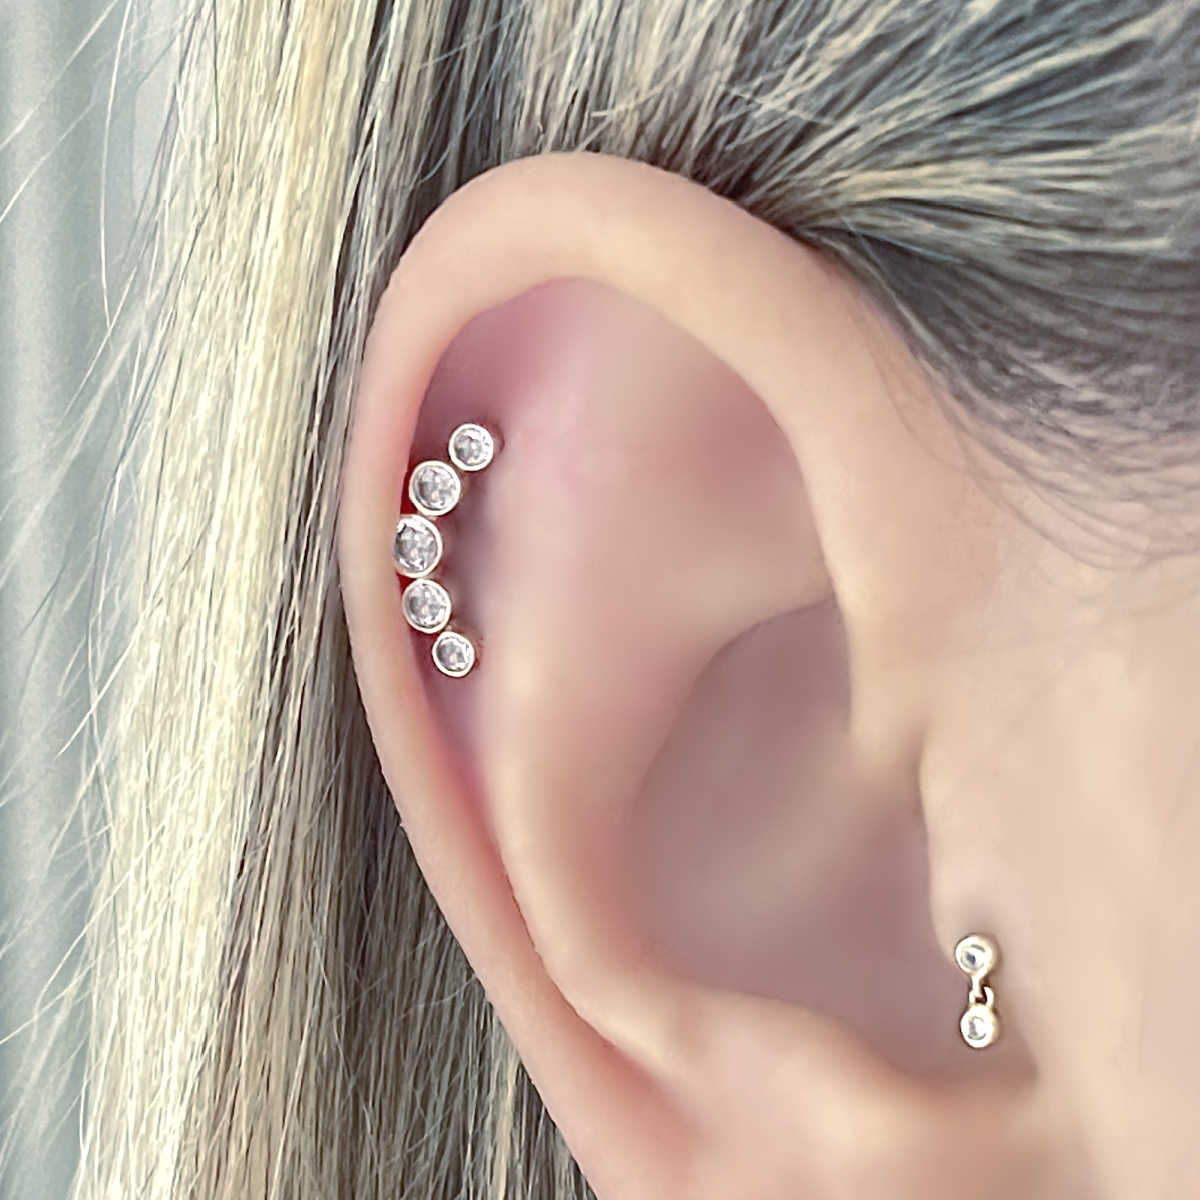 1PC (Gold)Moon Star Helix Earring Cartilage Piercing Jewellery 20G | Helix  earrings, Cartilage earrings, Piercing jewelry